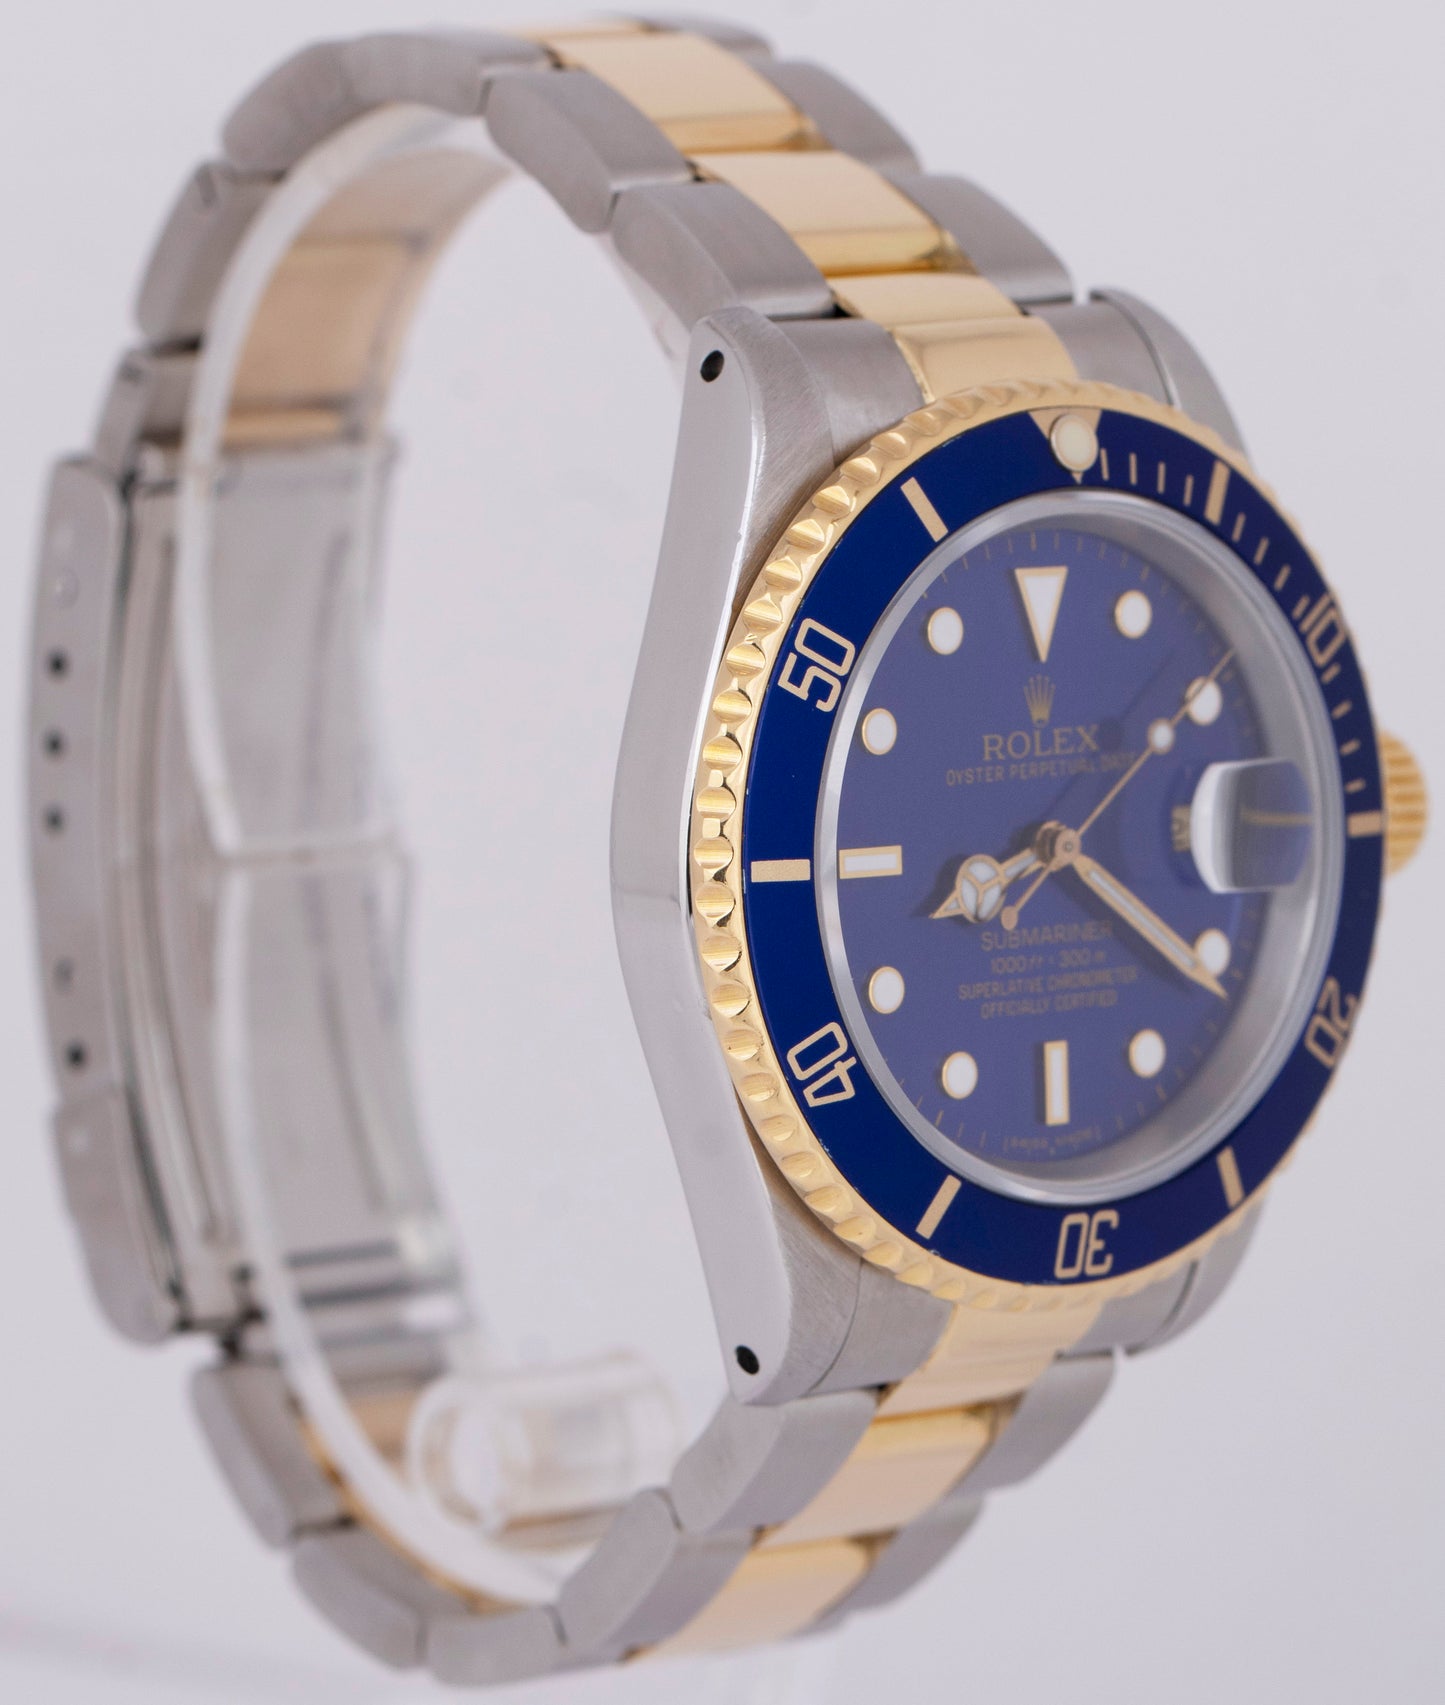 Rolex Submariner Date 40mm Blue Two-Tone 18K Yellow Gold Steel Watch 16613 LB